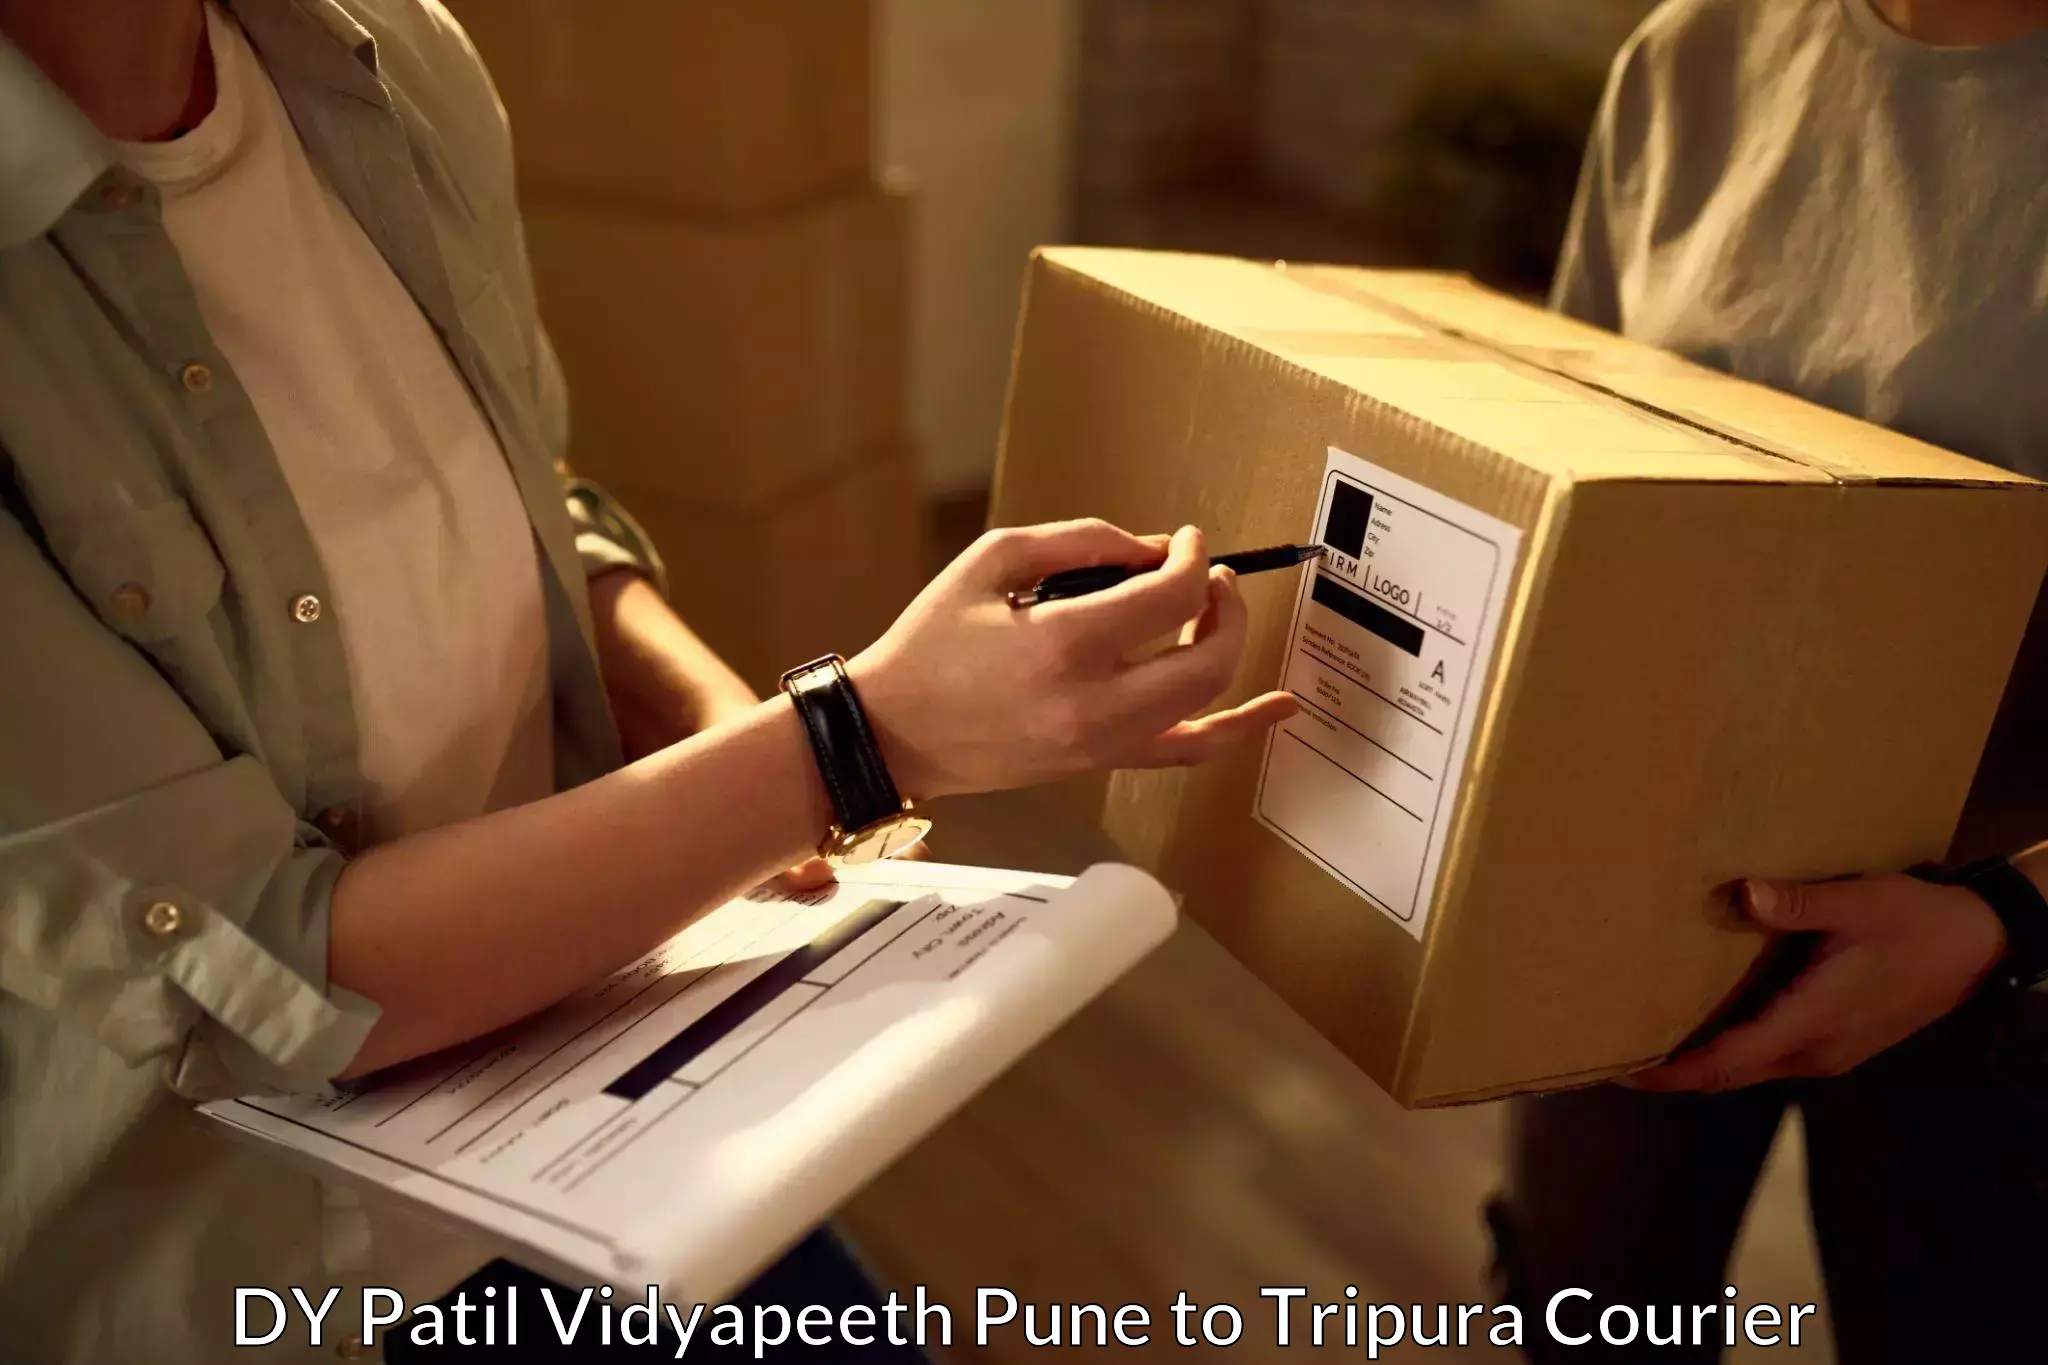 24-hour delivery options DY Patil Vidyapeeth Pune to Agartala